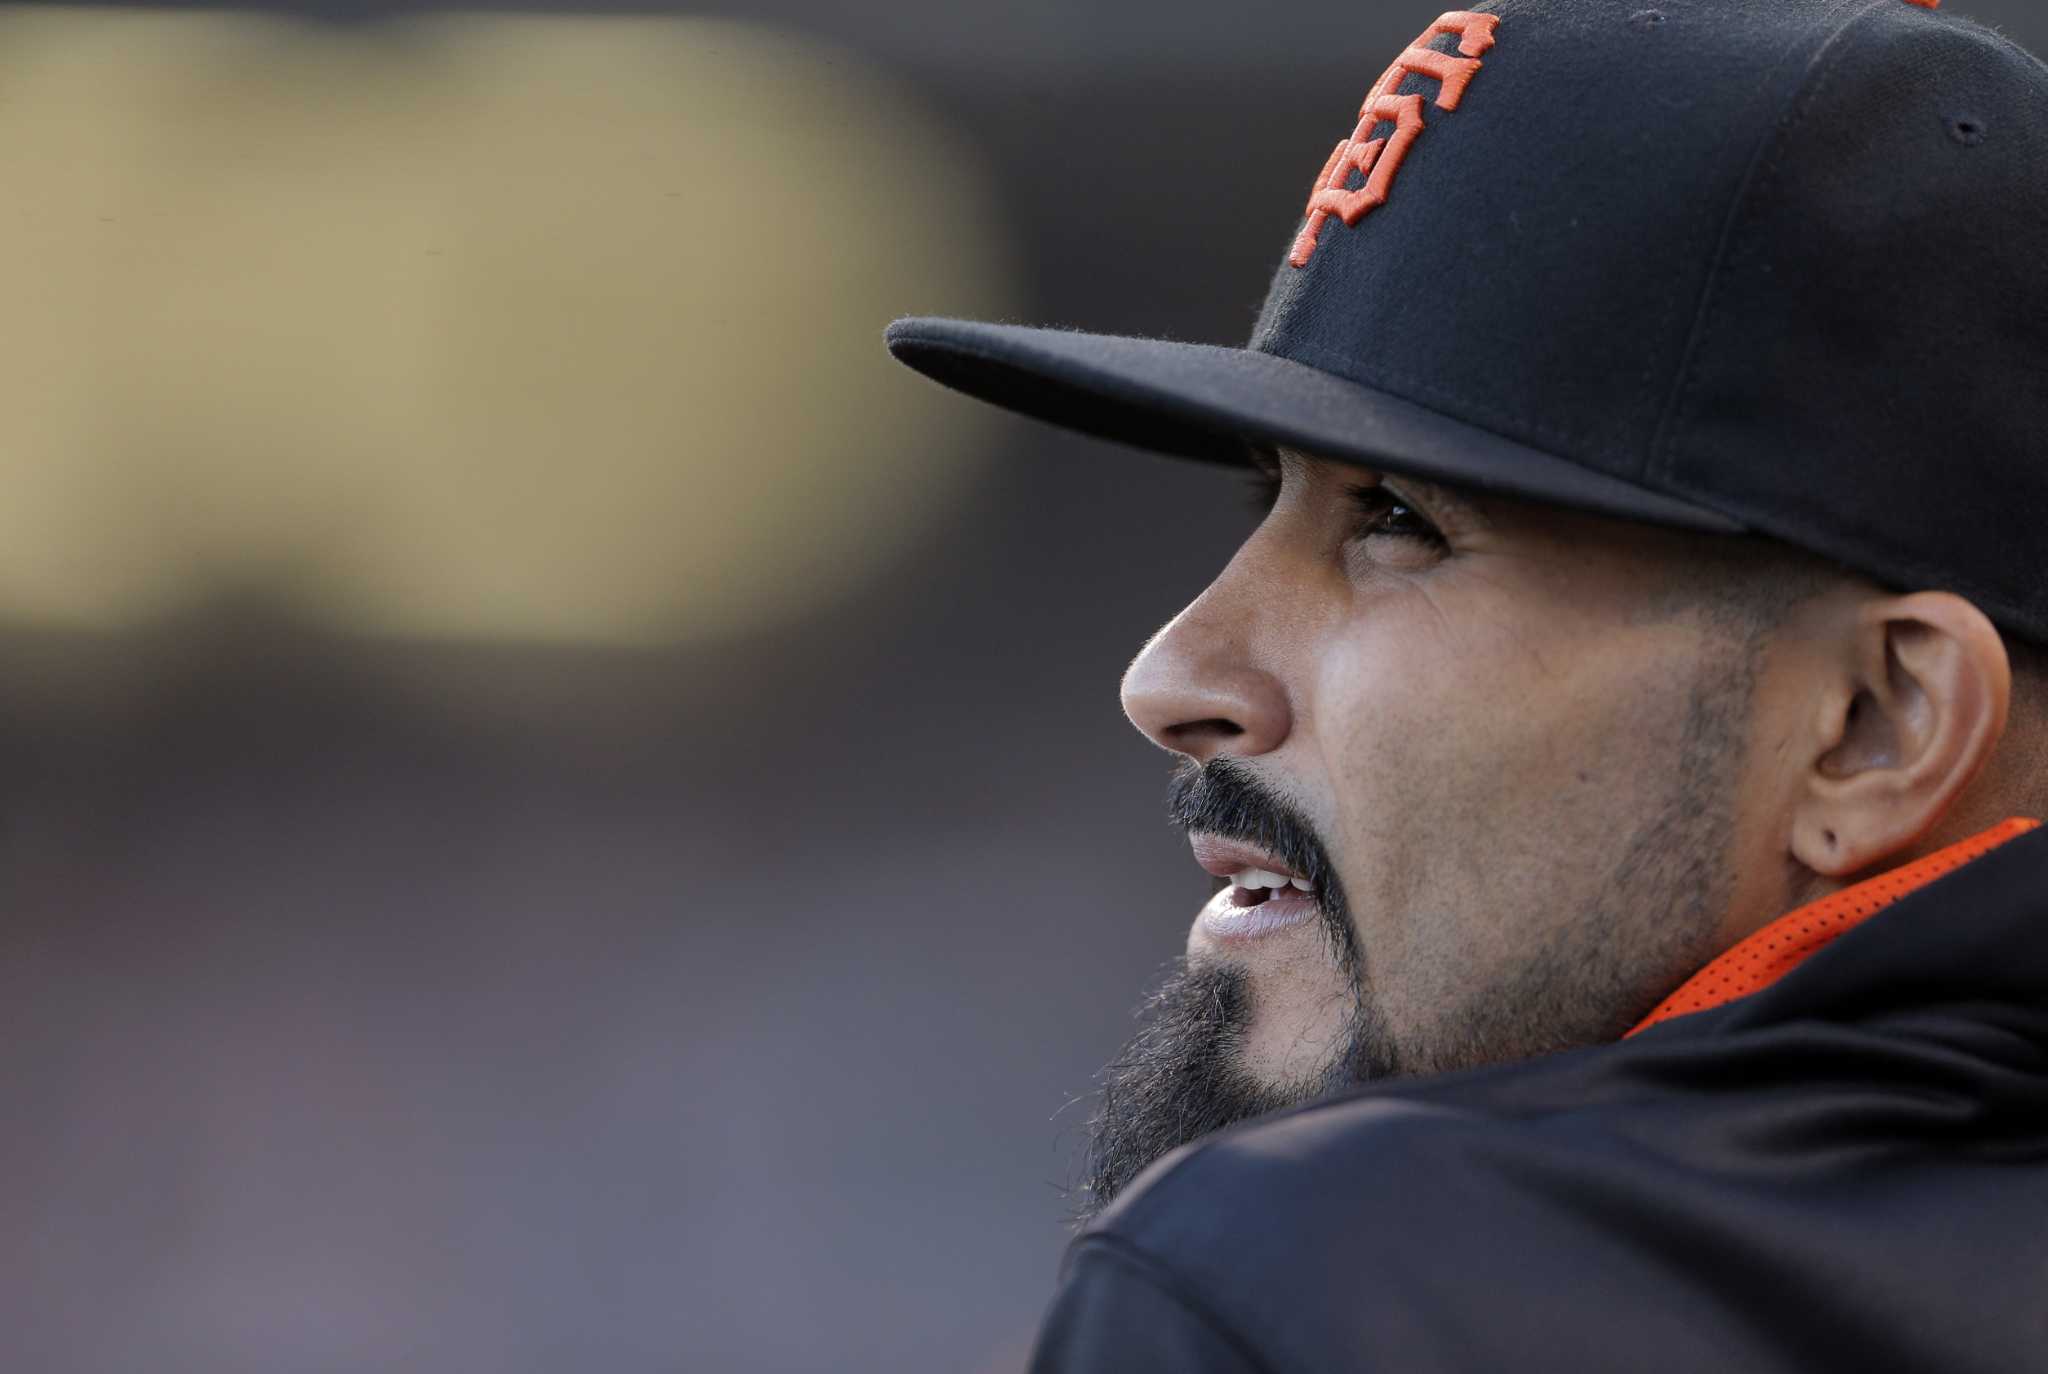 SF Giants: Sergio Romo signs on 'for a chance to close the book